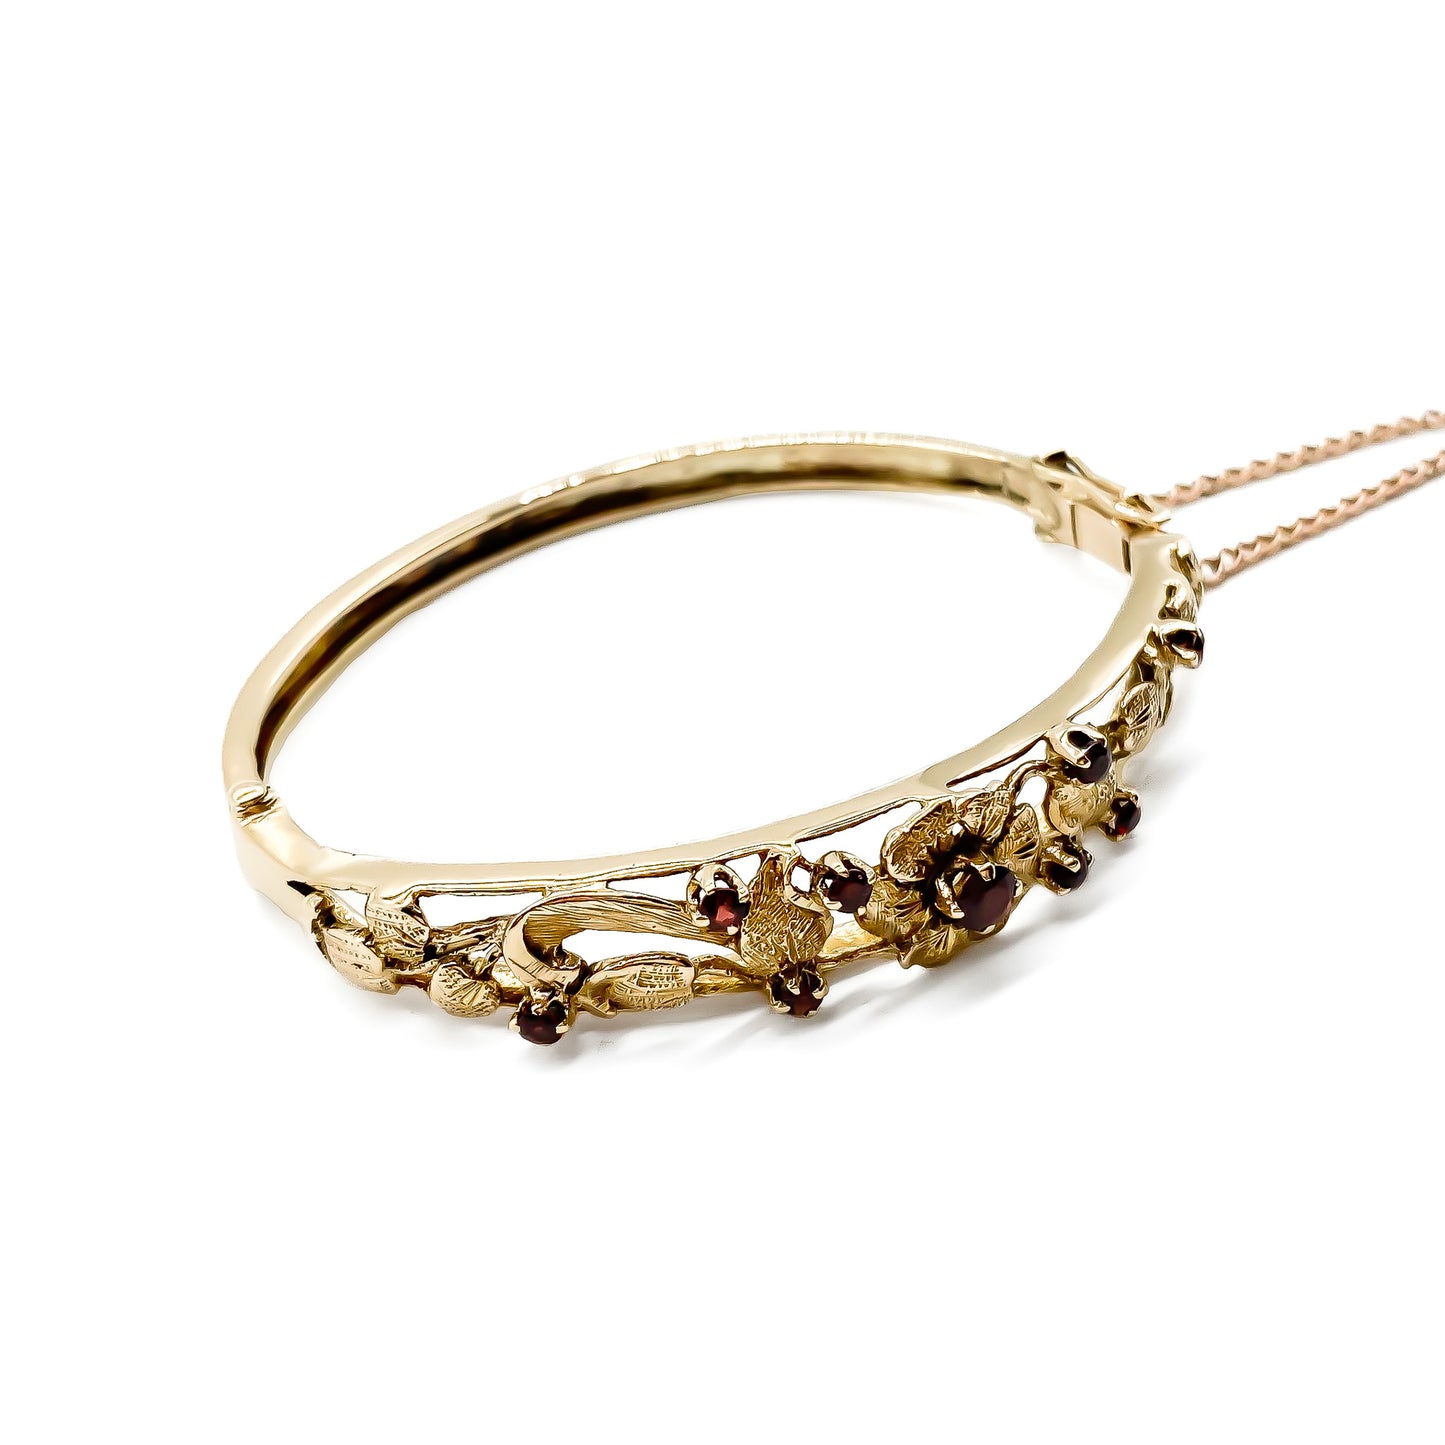 Beautiful 9ct rose gold bangle set with nine faceted garnets in a lovely floral design. Gold safety chain attached.